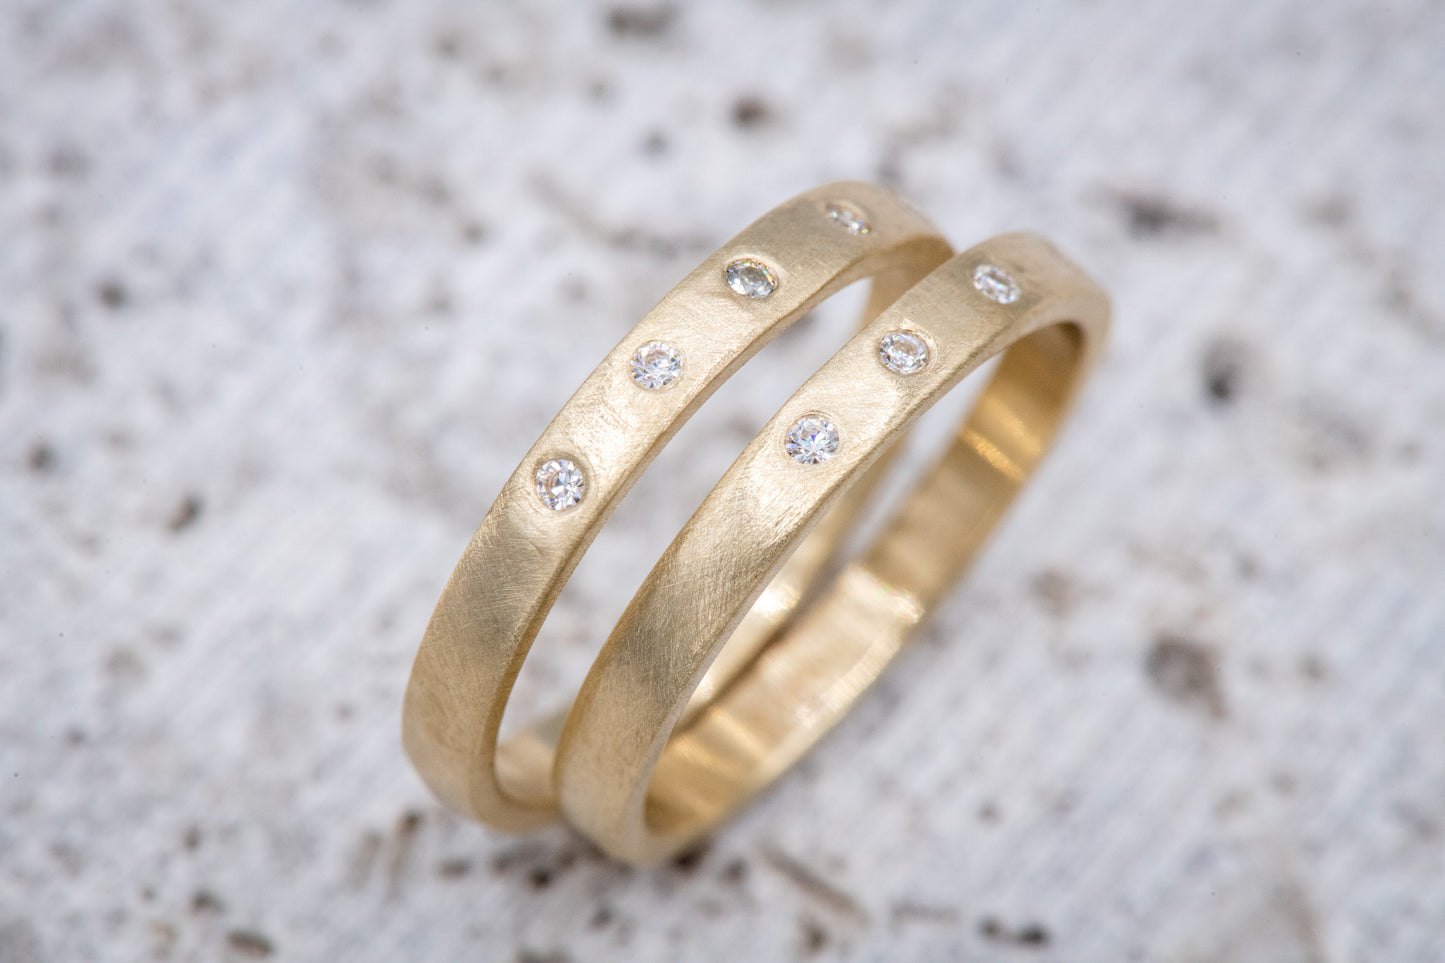 A pair of handmade gold wedding bands with Moissanite and diamonds.